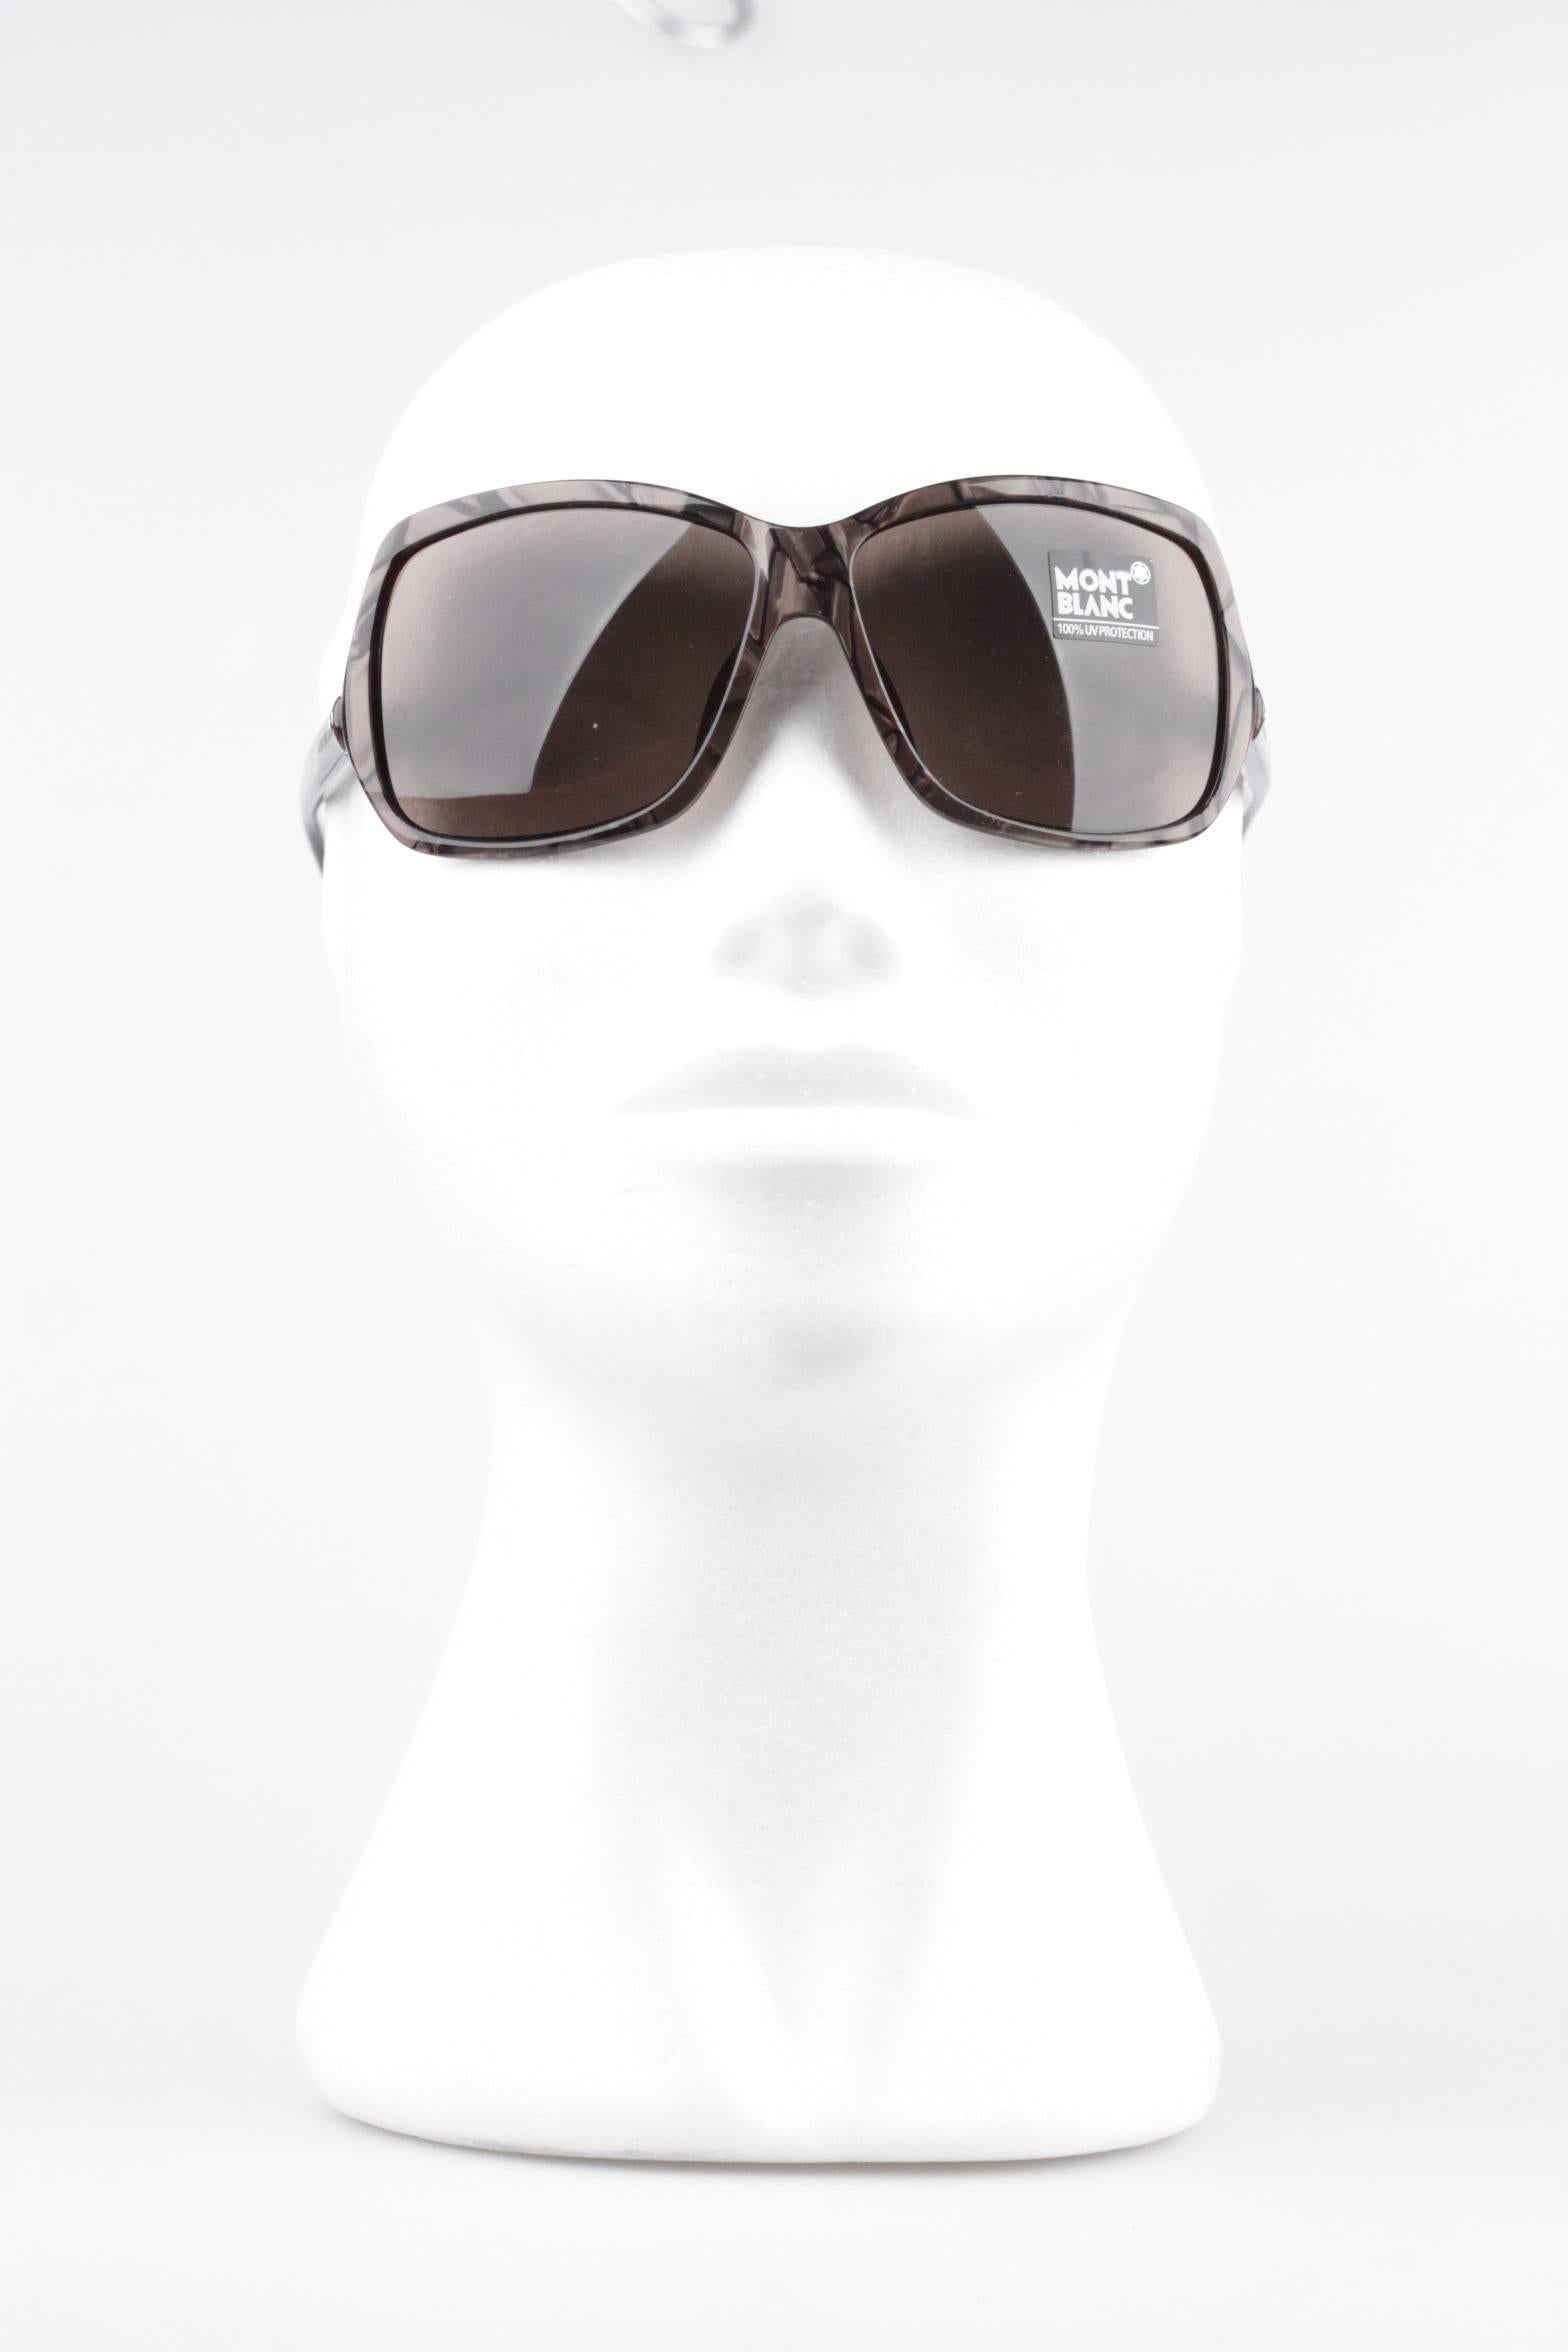 Montblanc Oversized Brown Sunglasses Mod. MB139S 60mm New Old Stock 5